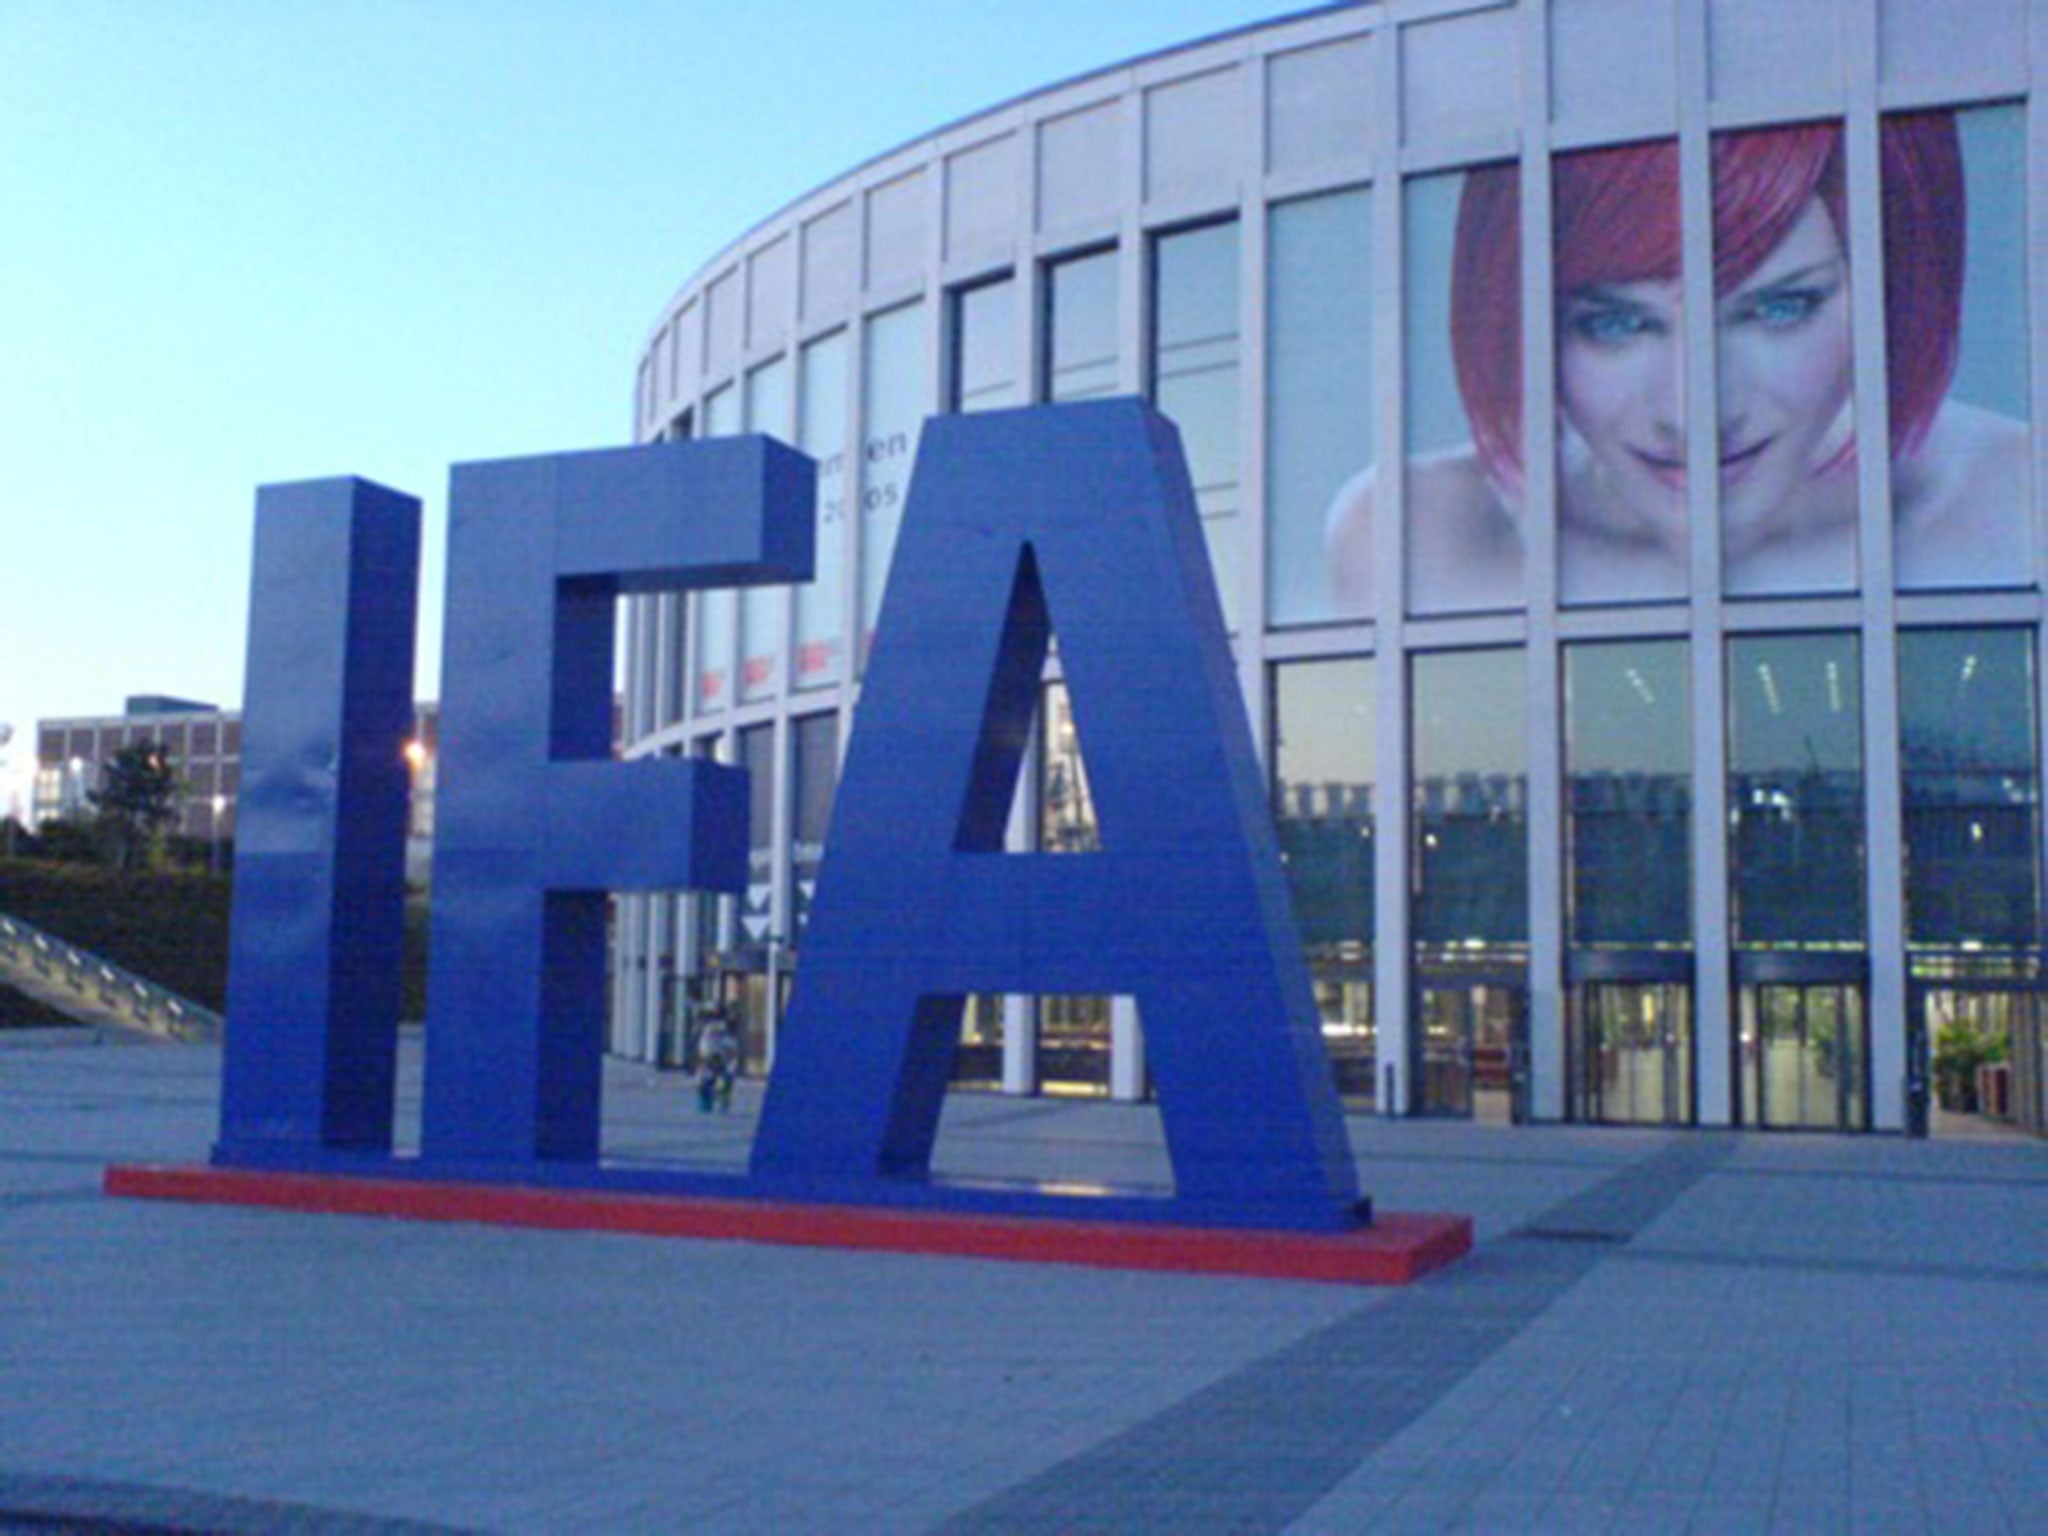 The IFA is held at the Messe Berlin convention centre (pictured here in 2005)